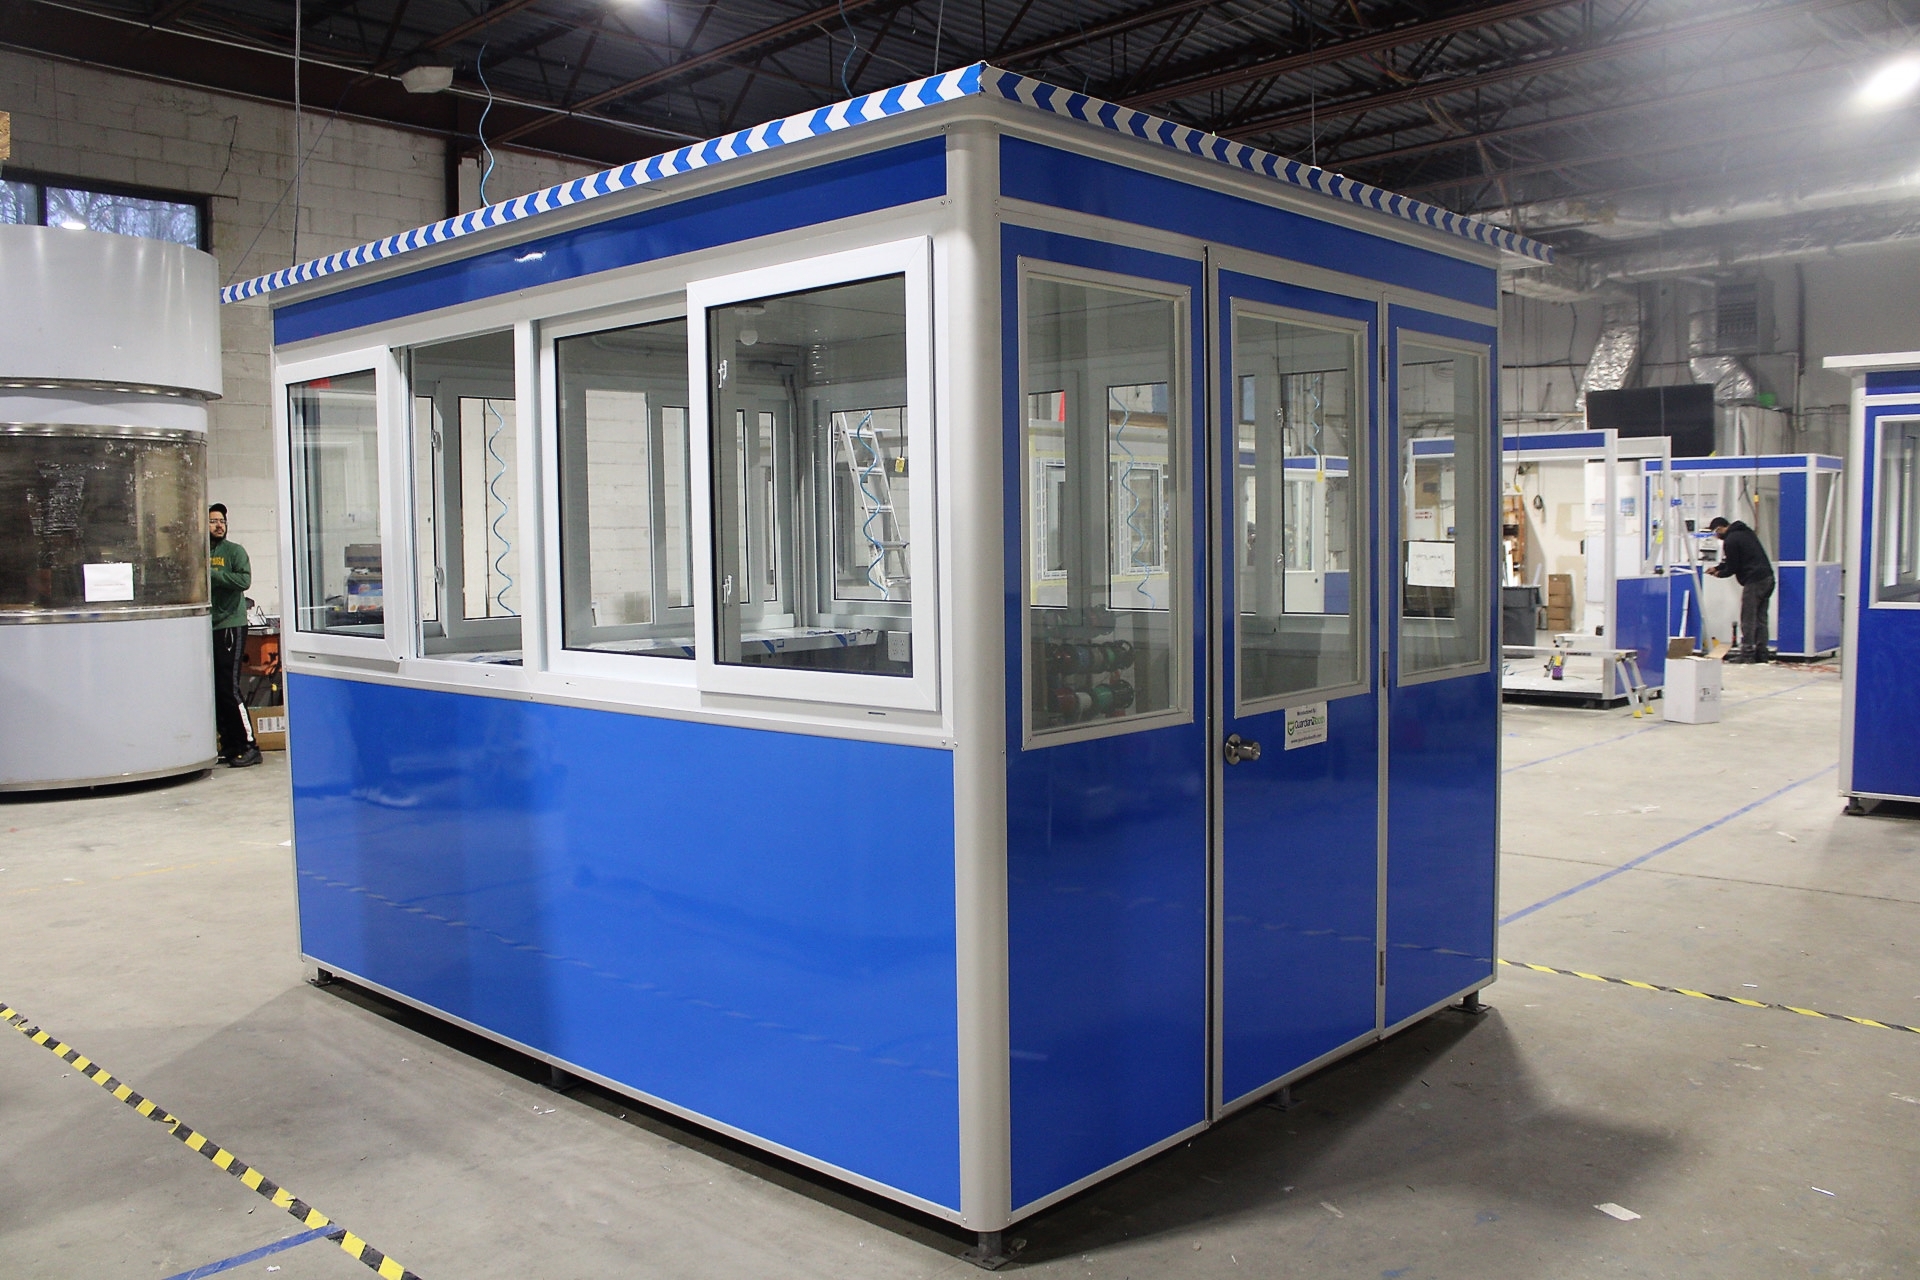 8×10 Prefabricated Guardian Booth